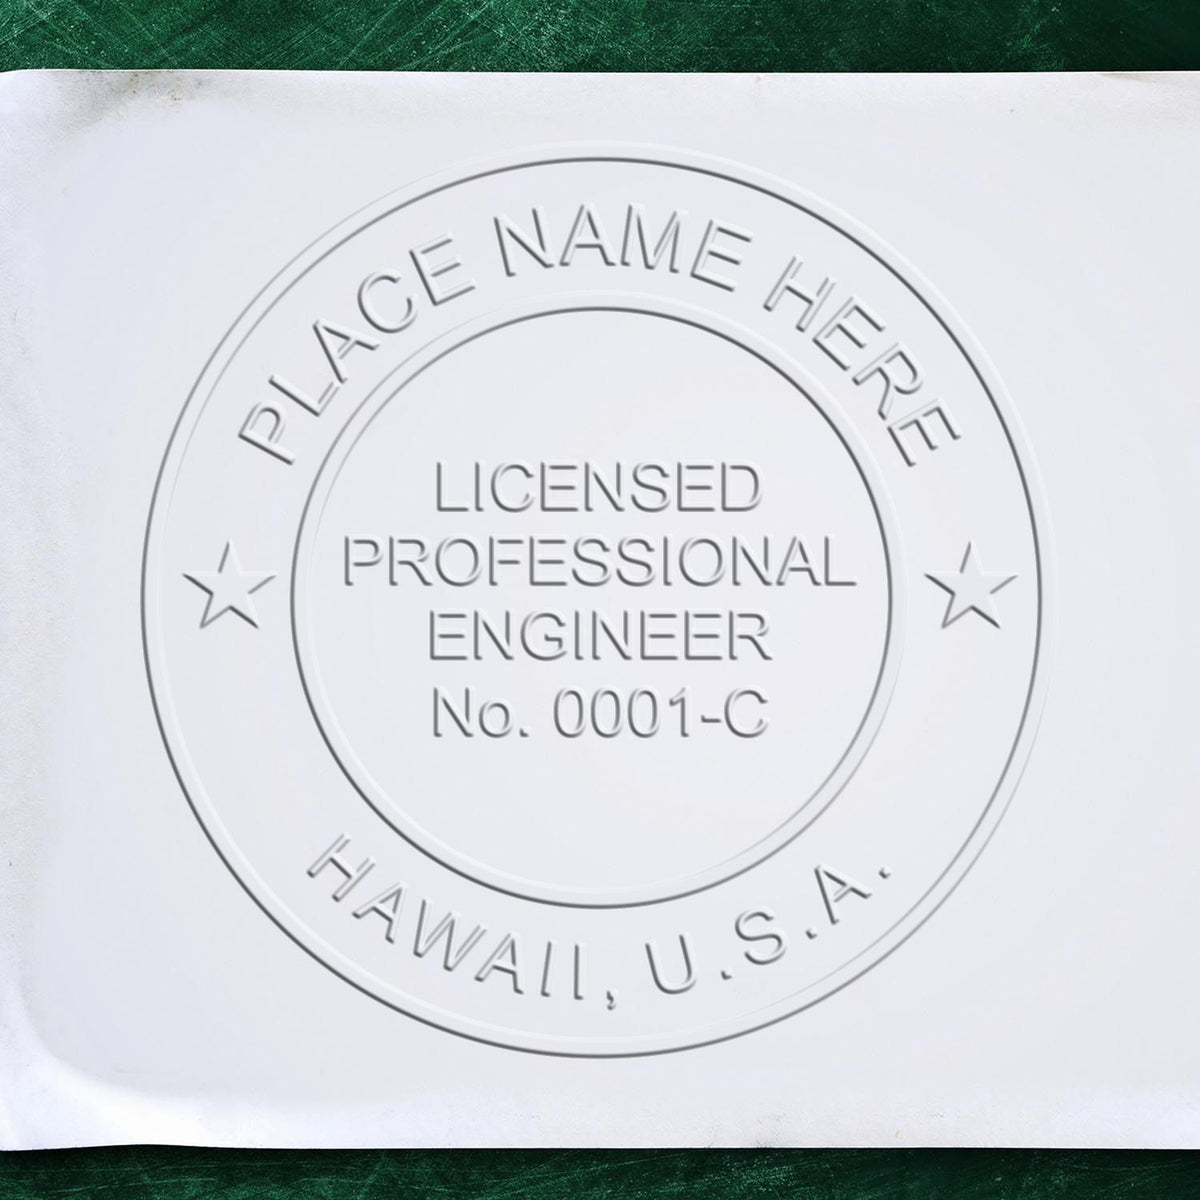 An alternative view of the State of Hawaii Extended Long Reach Engineer Seal stamped on a sheet of paper showing the image in use